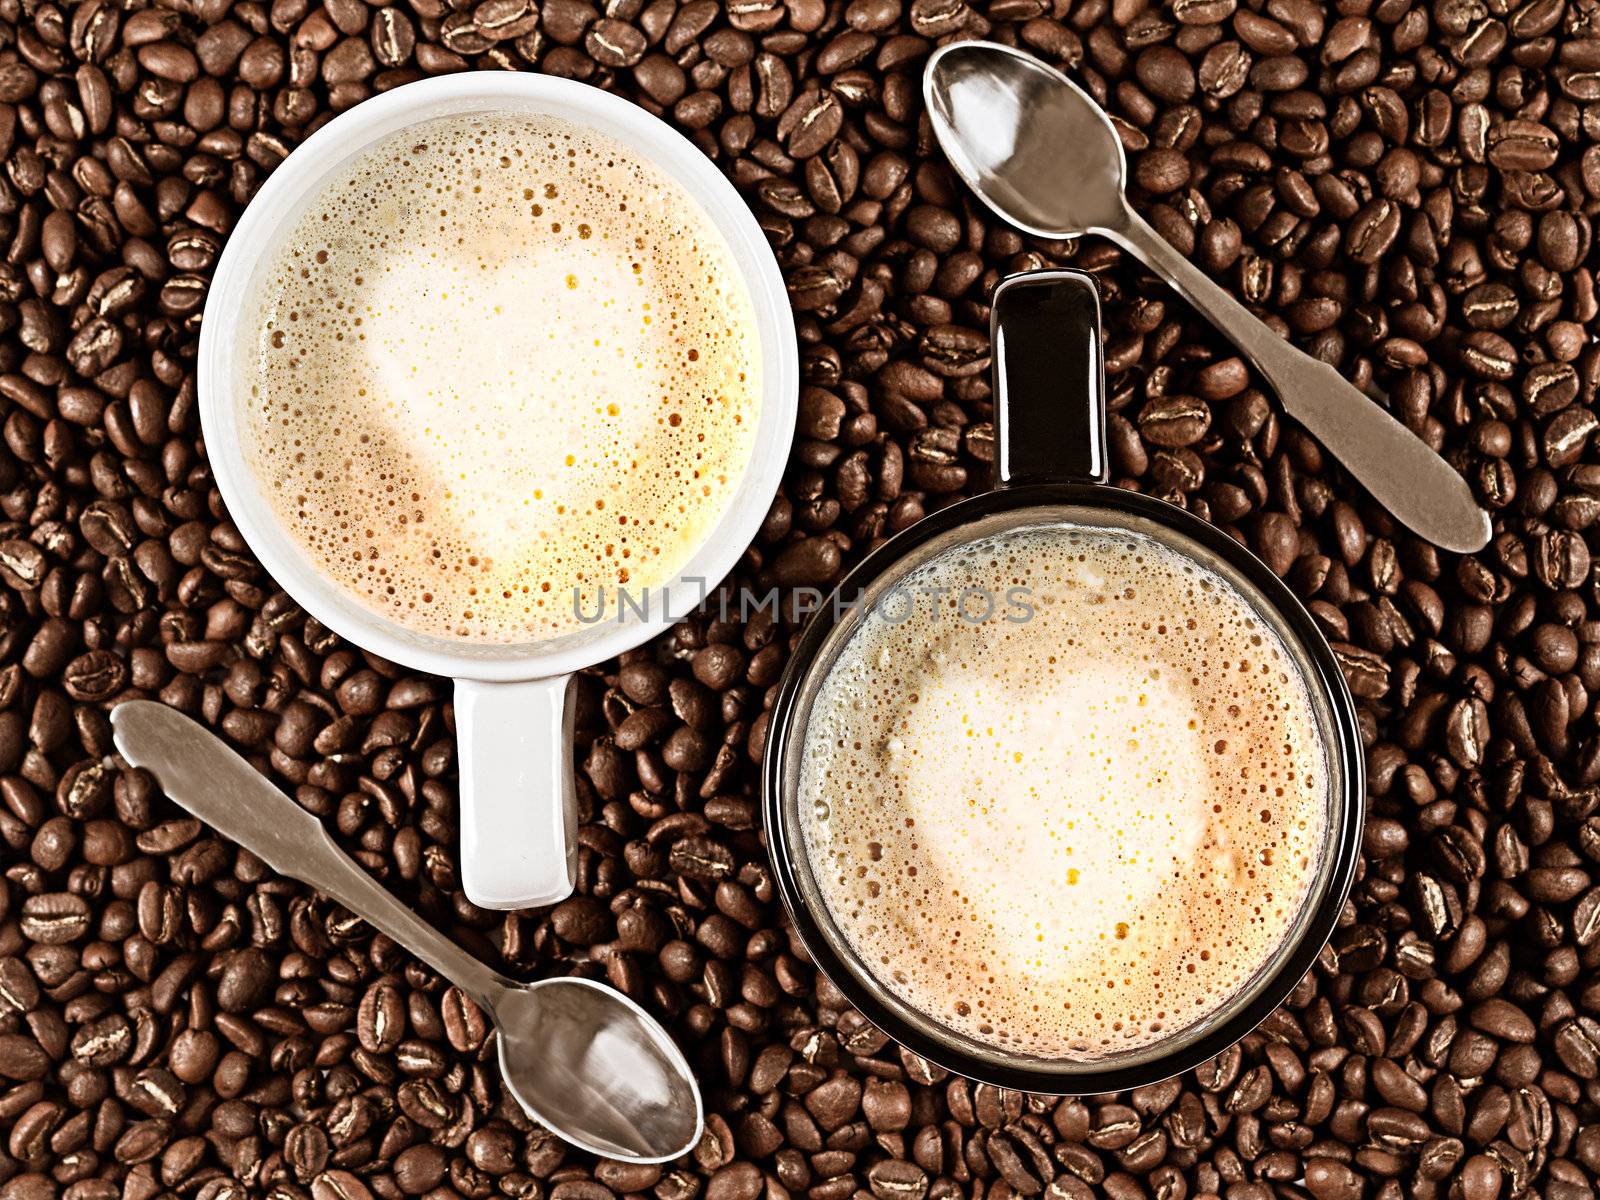 Two cups with Cafee Latte with heart shaped rosetta surrounded by coffee beans and spoons